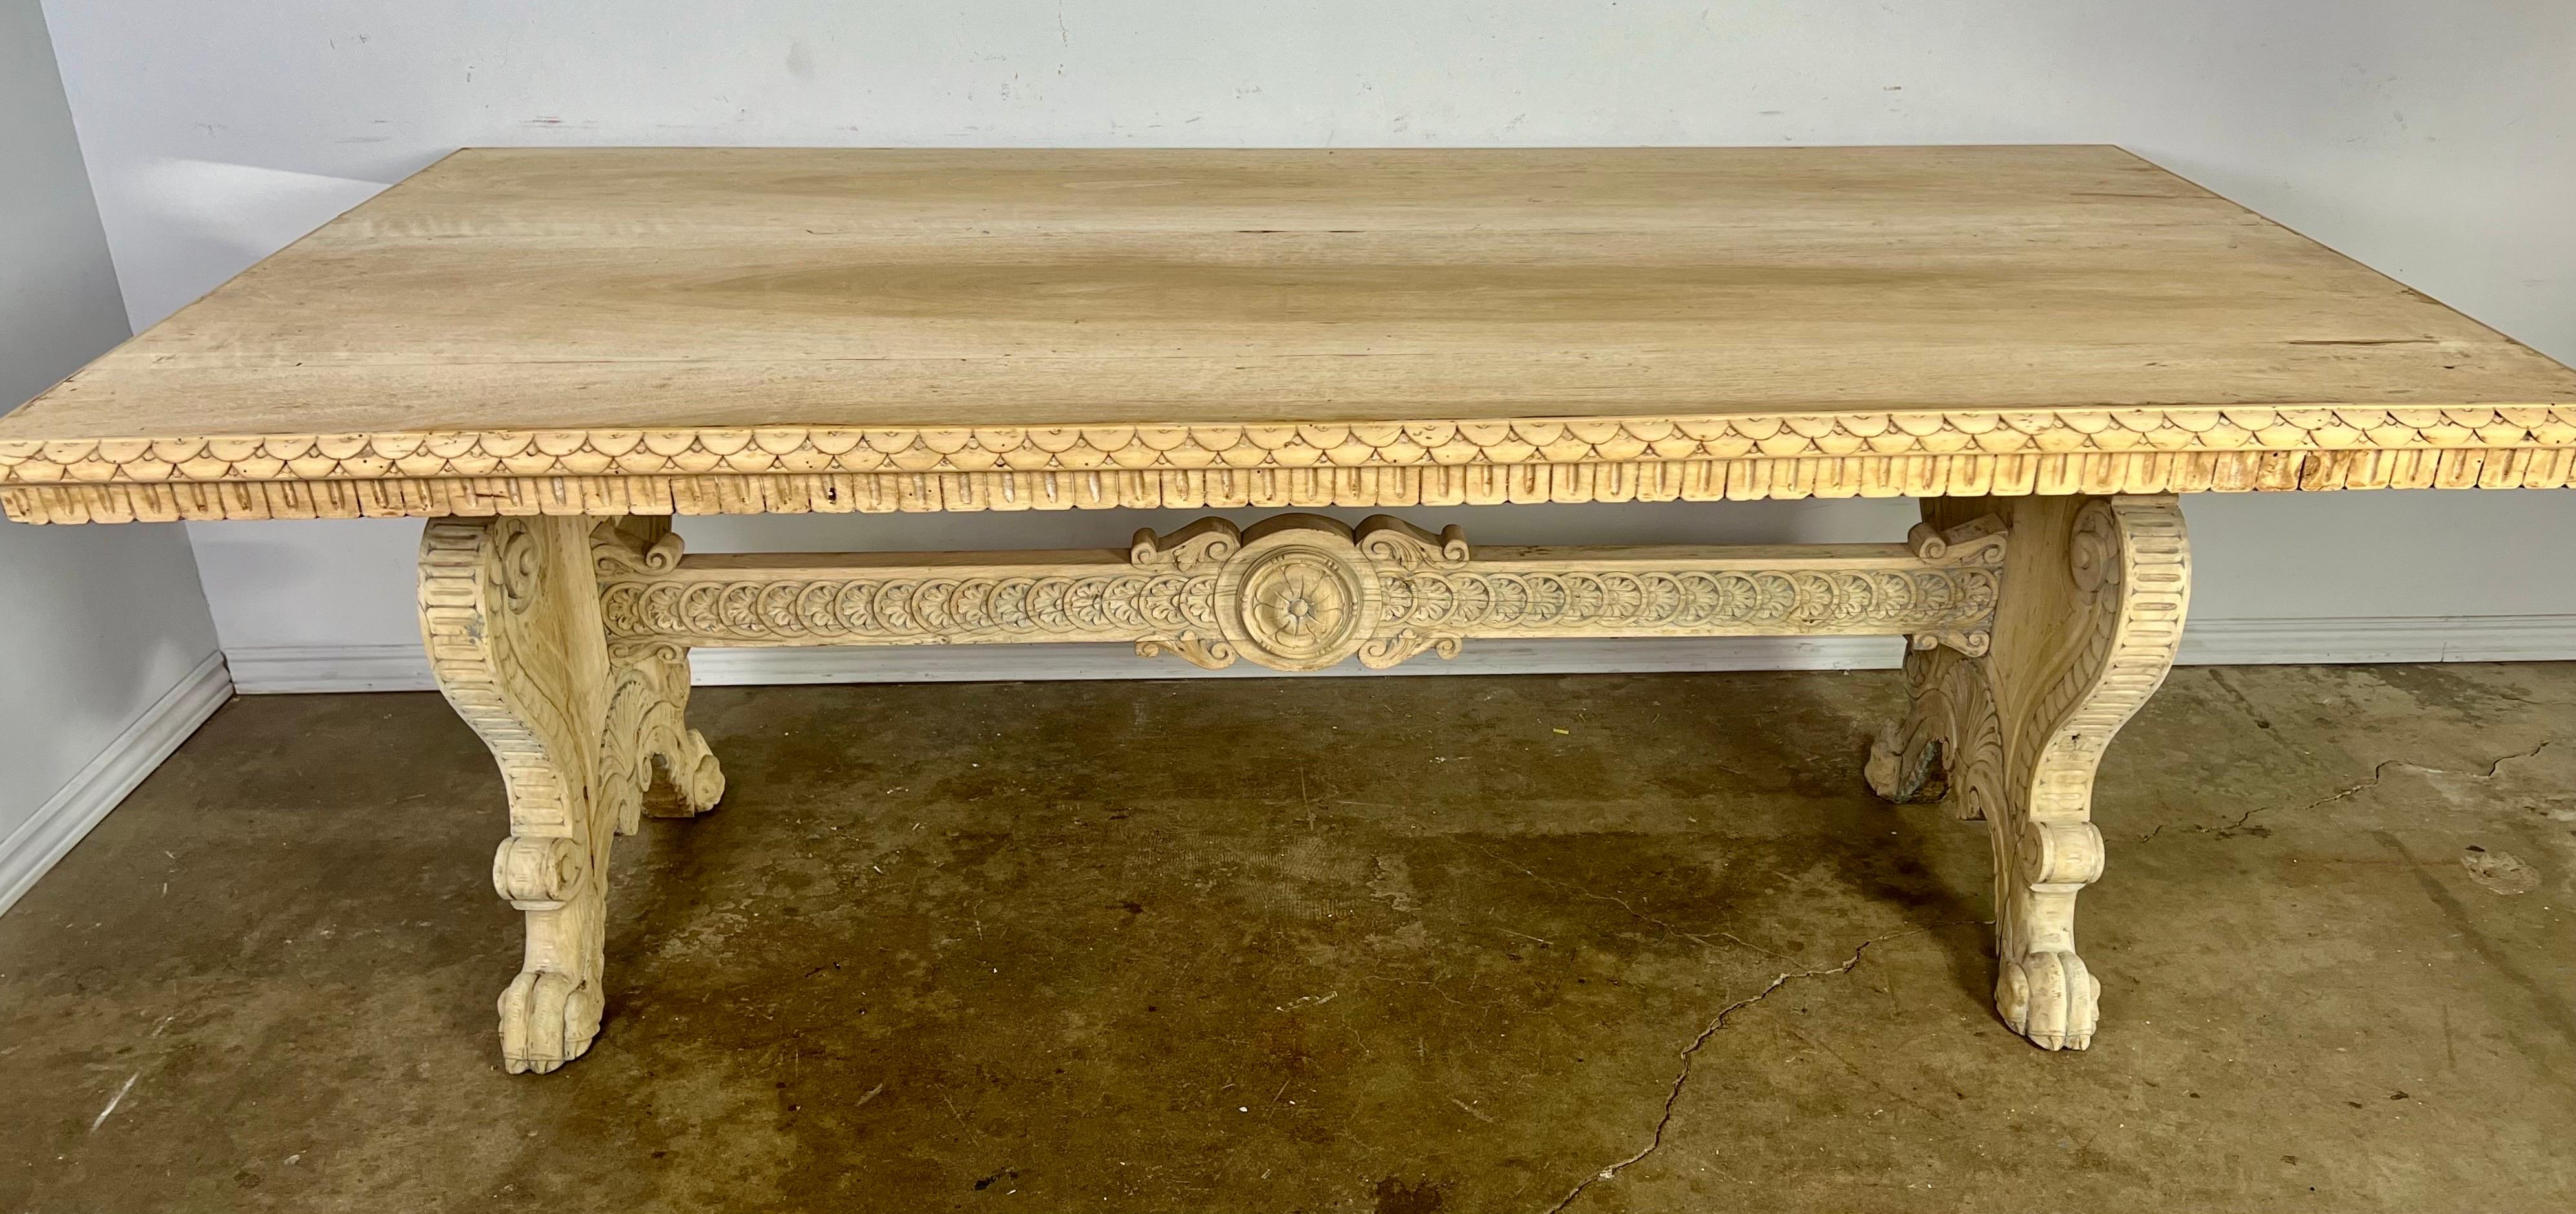 19th C. Italian carved trestle table. A large rectangular top sits on two lyre shaped carved pedestal bases that are connected by a center stretcher. Lion paw carved feet.